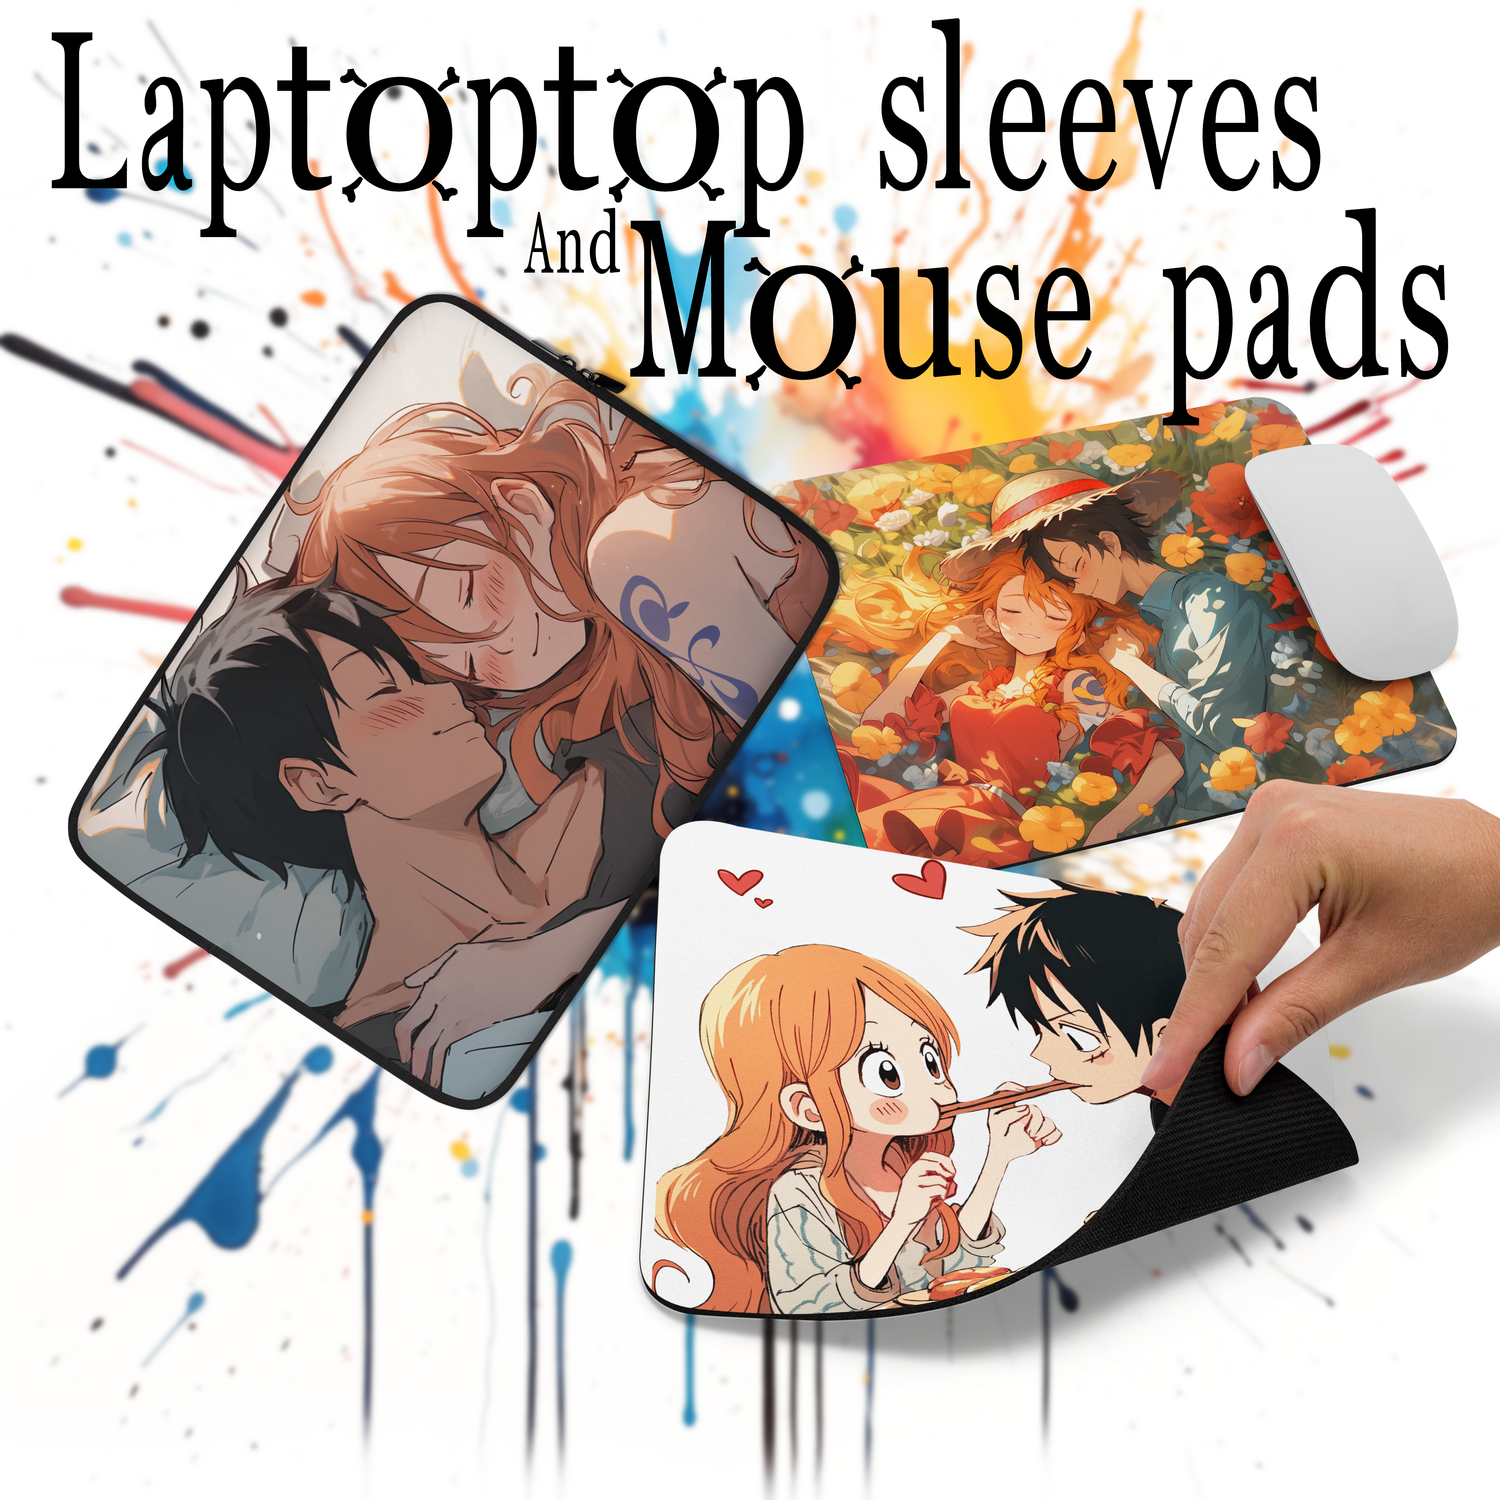 Laptop sleeves and mouse pads